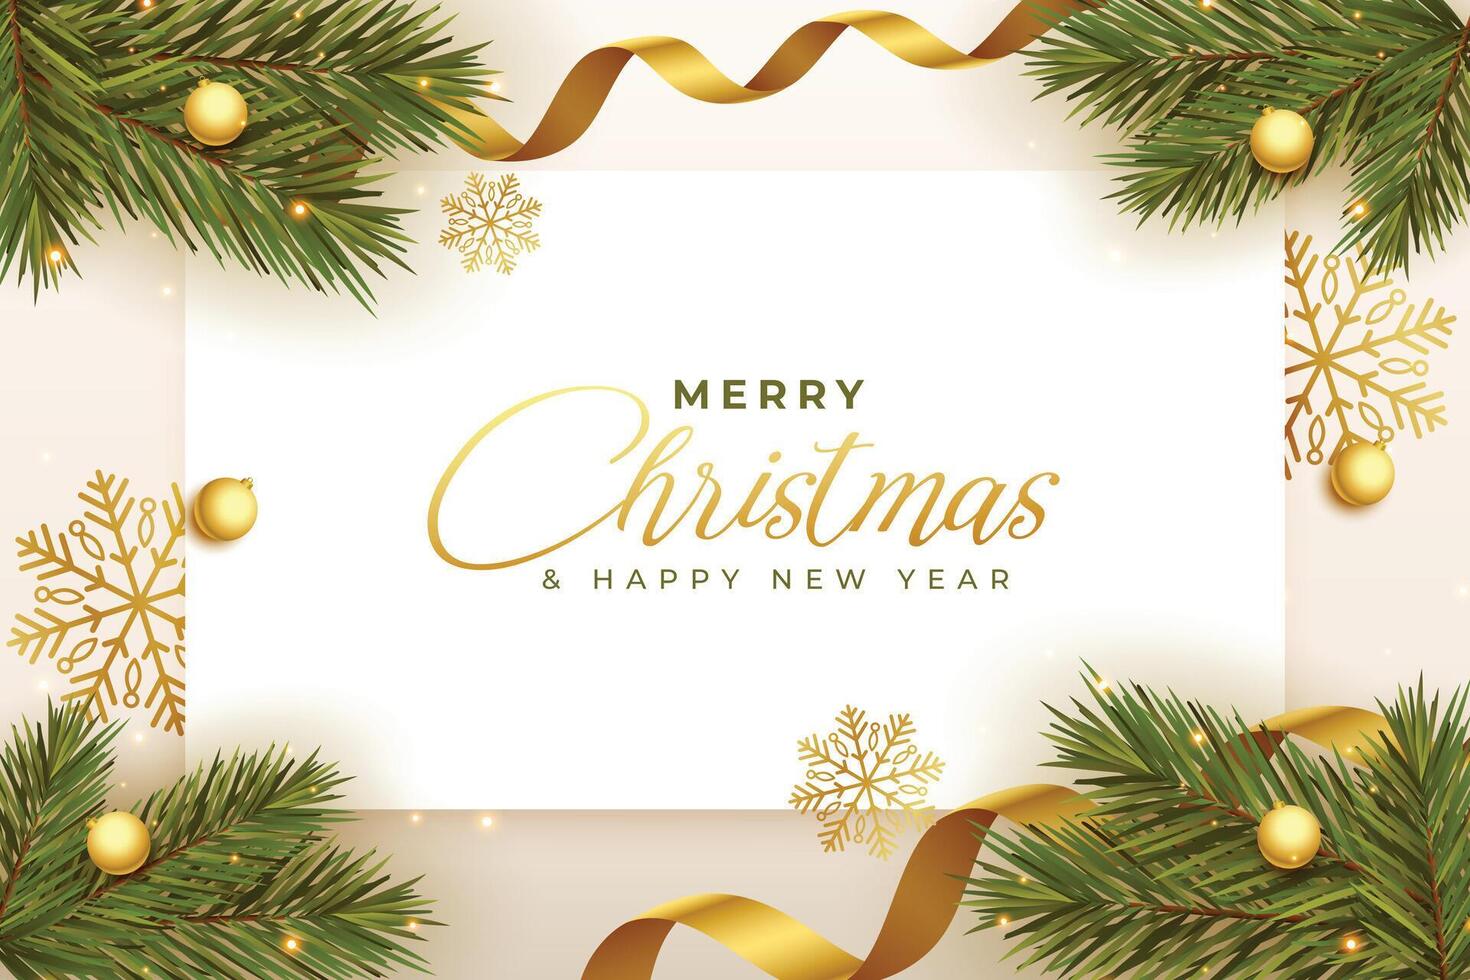 merry christmas holiday background in 3d realistic style vector